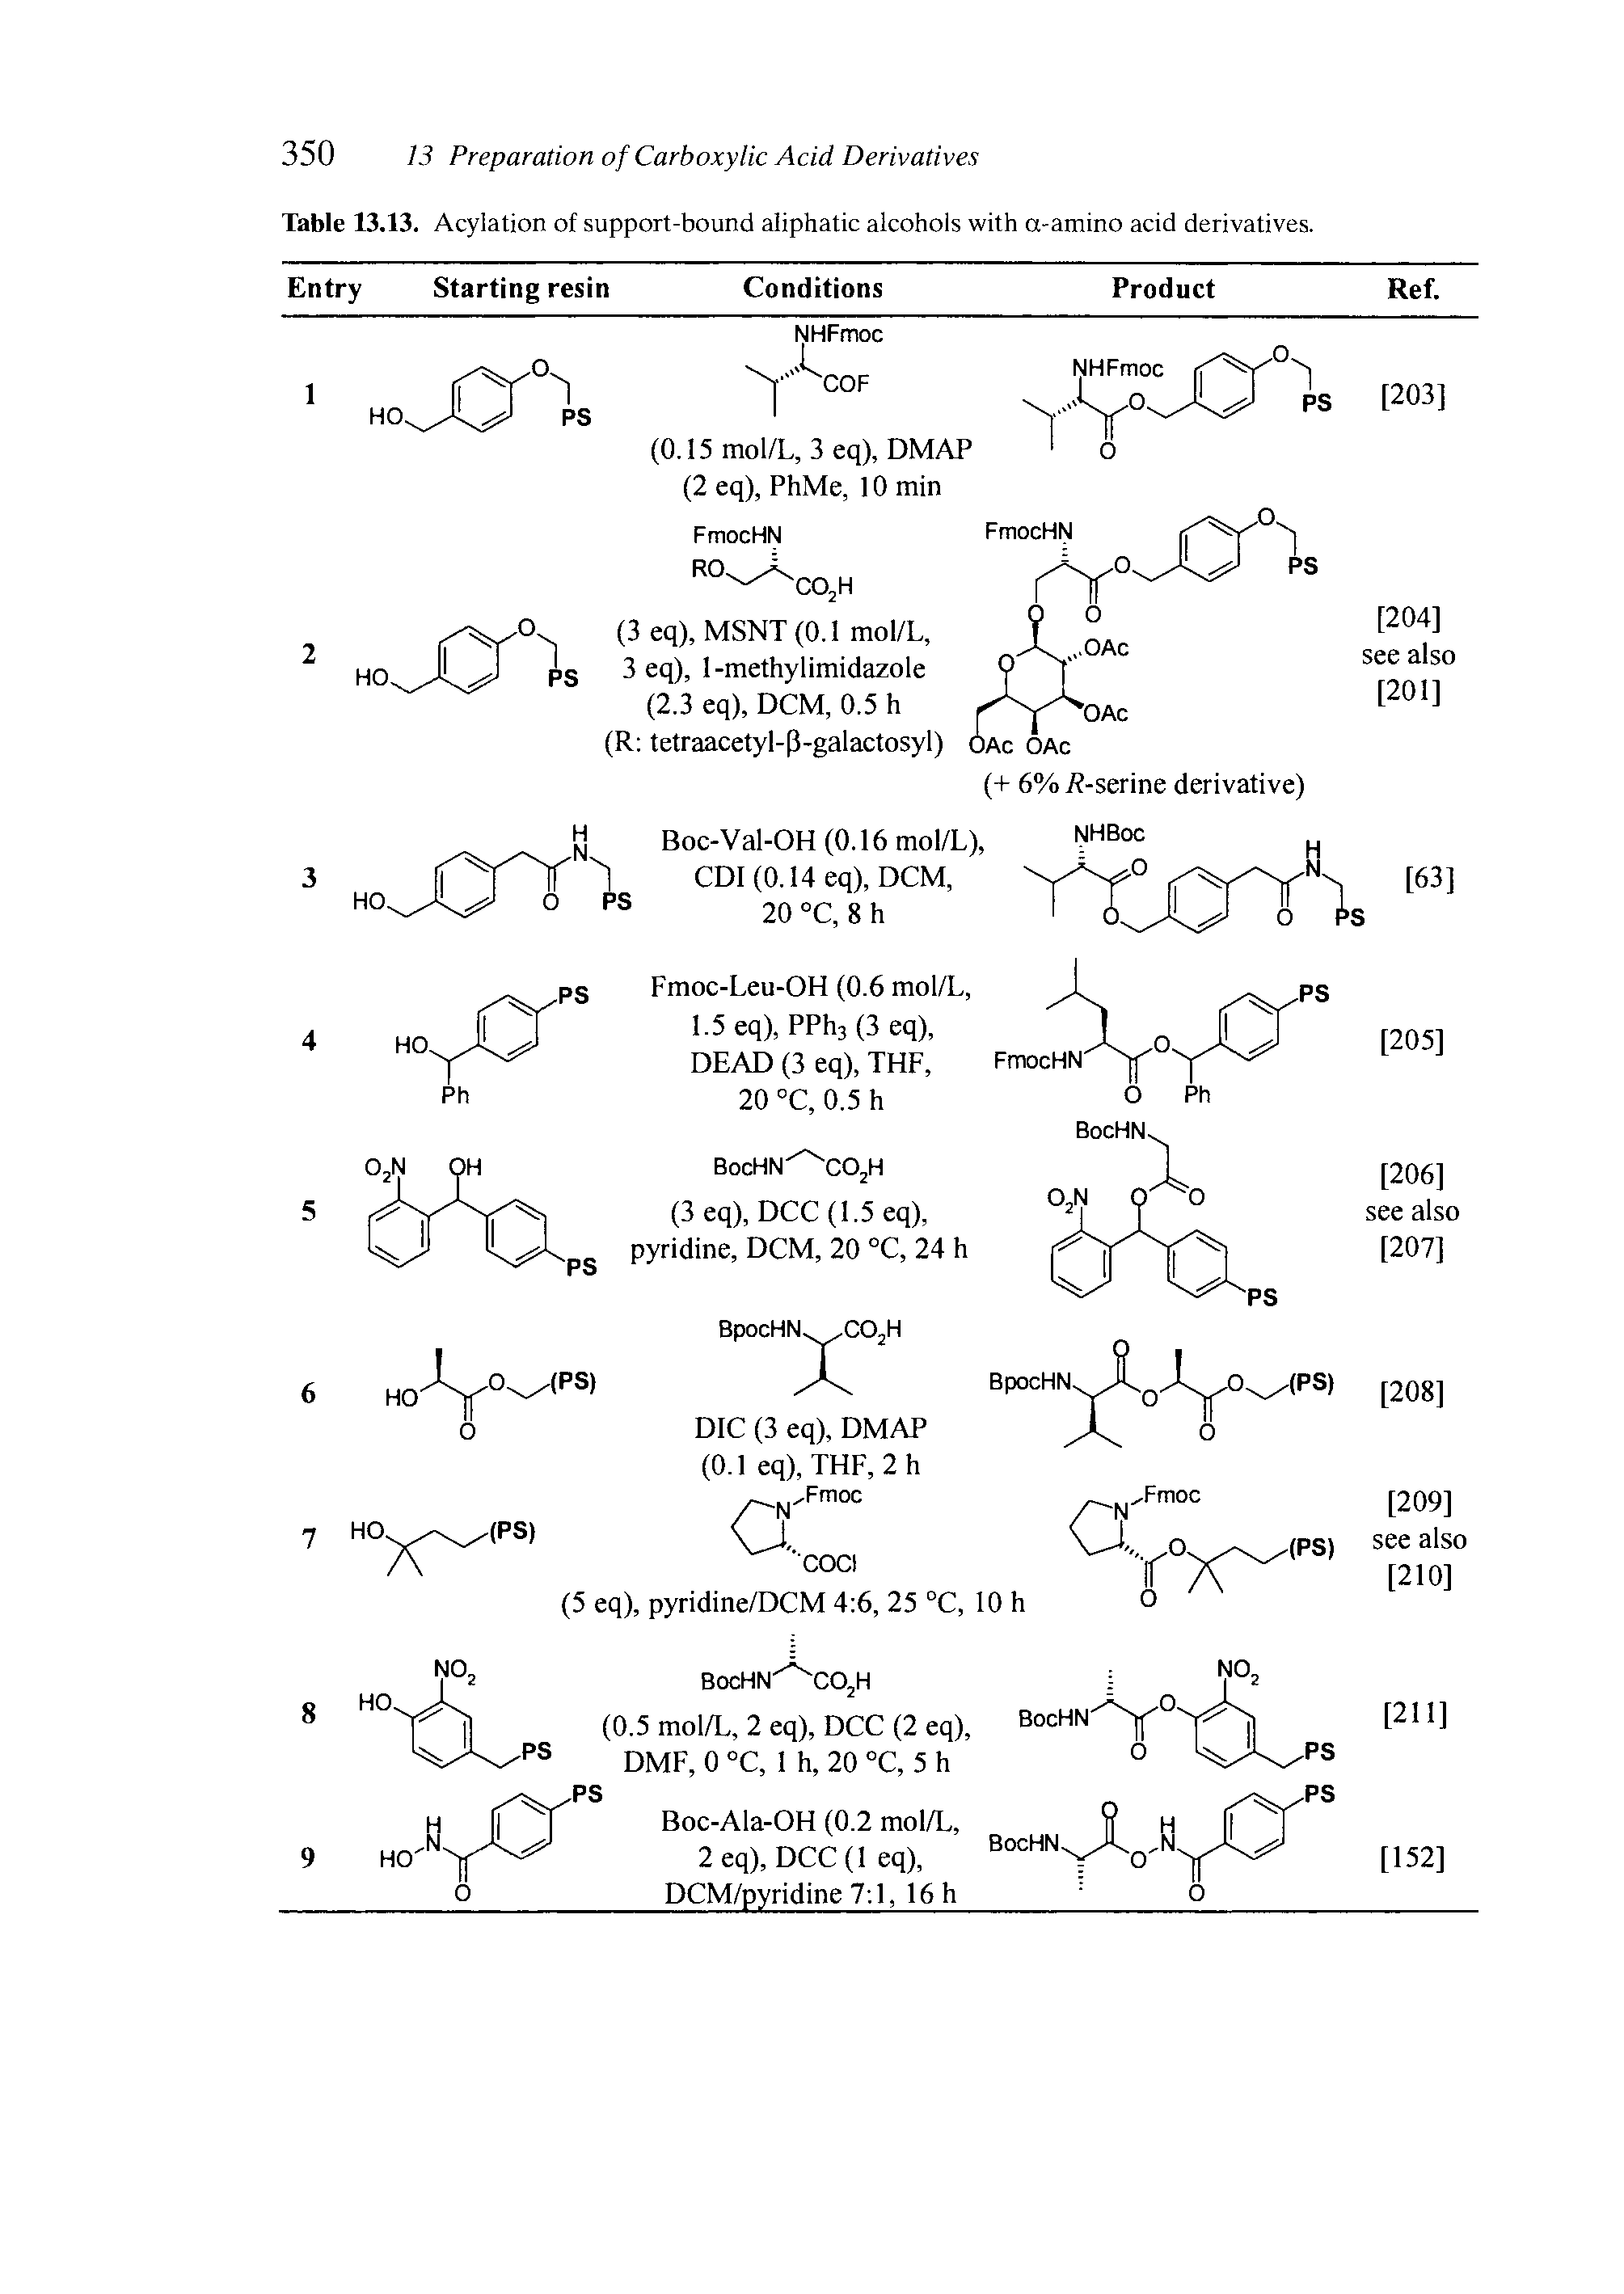 Table 13.13. Acylation of support-bound aliphatic alcohols with a-amino acid derivatives.